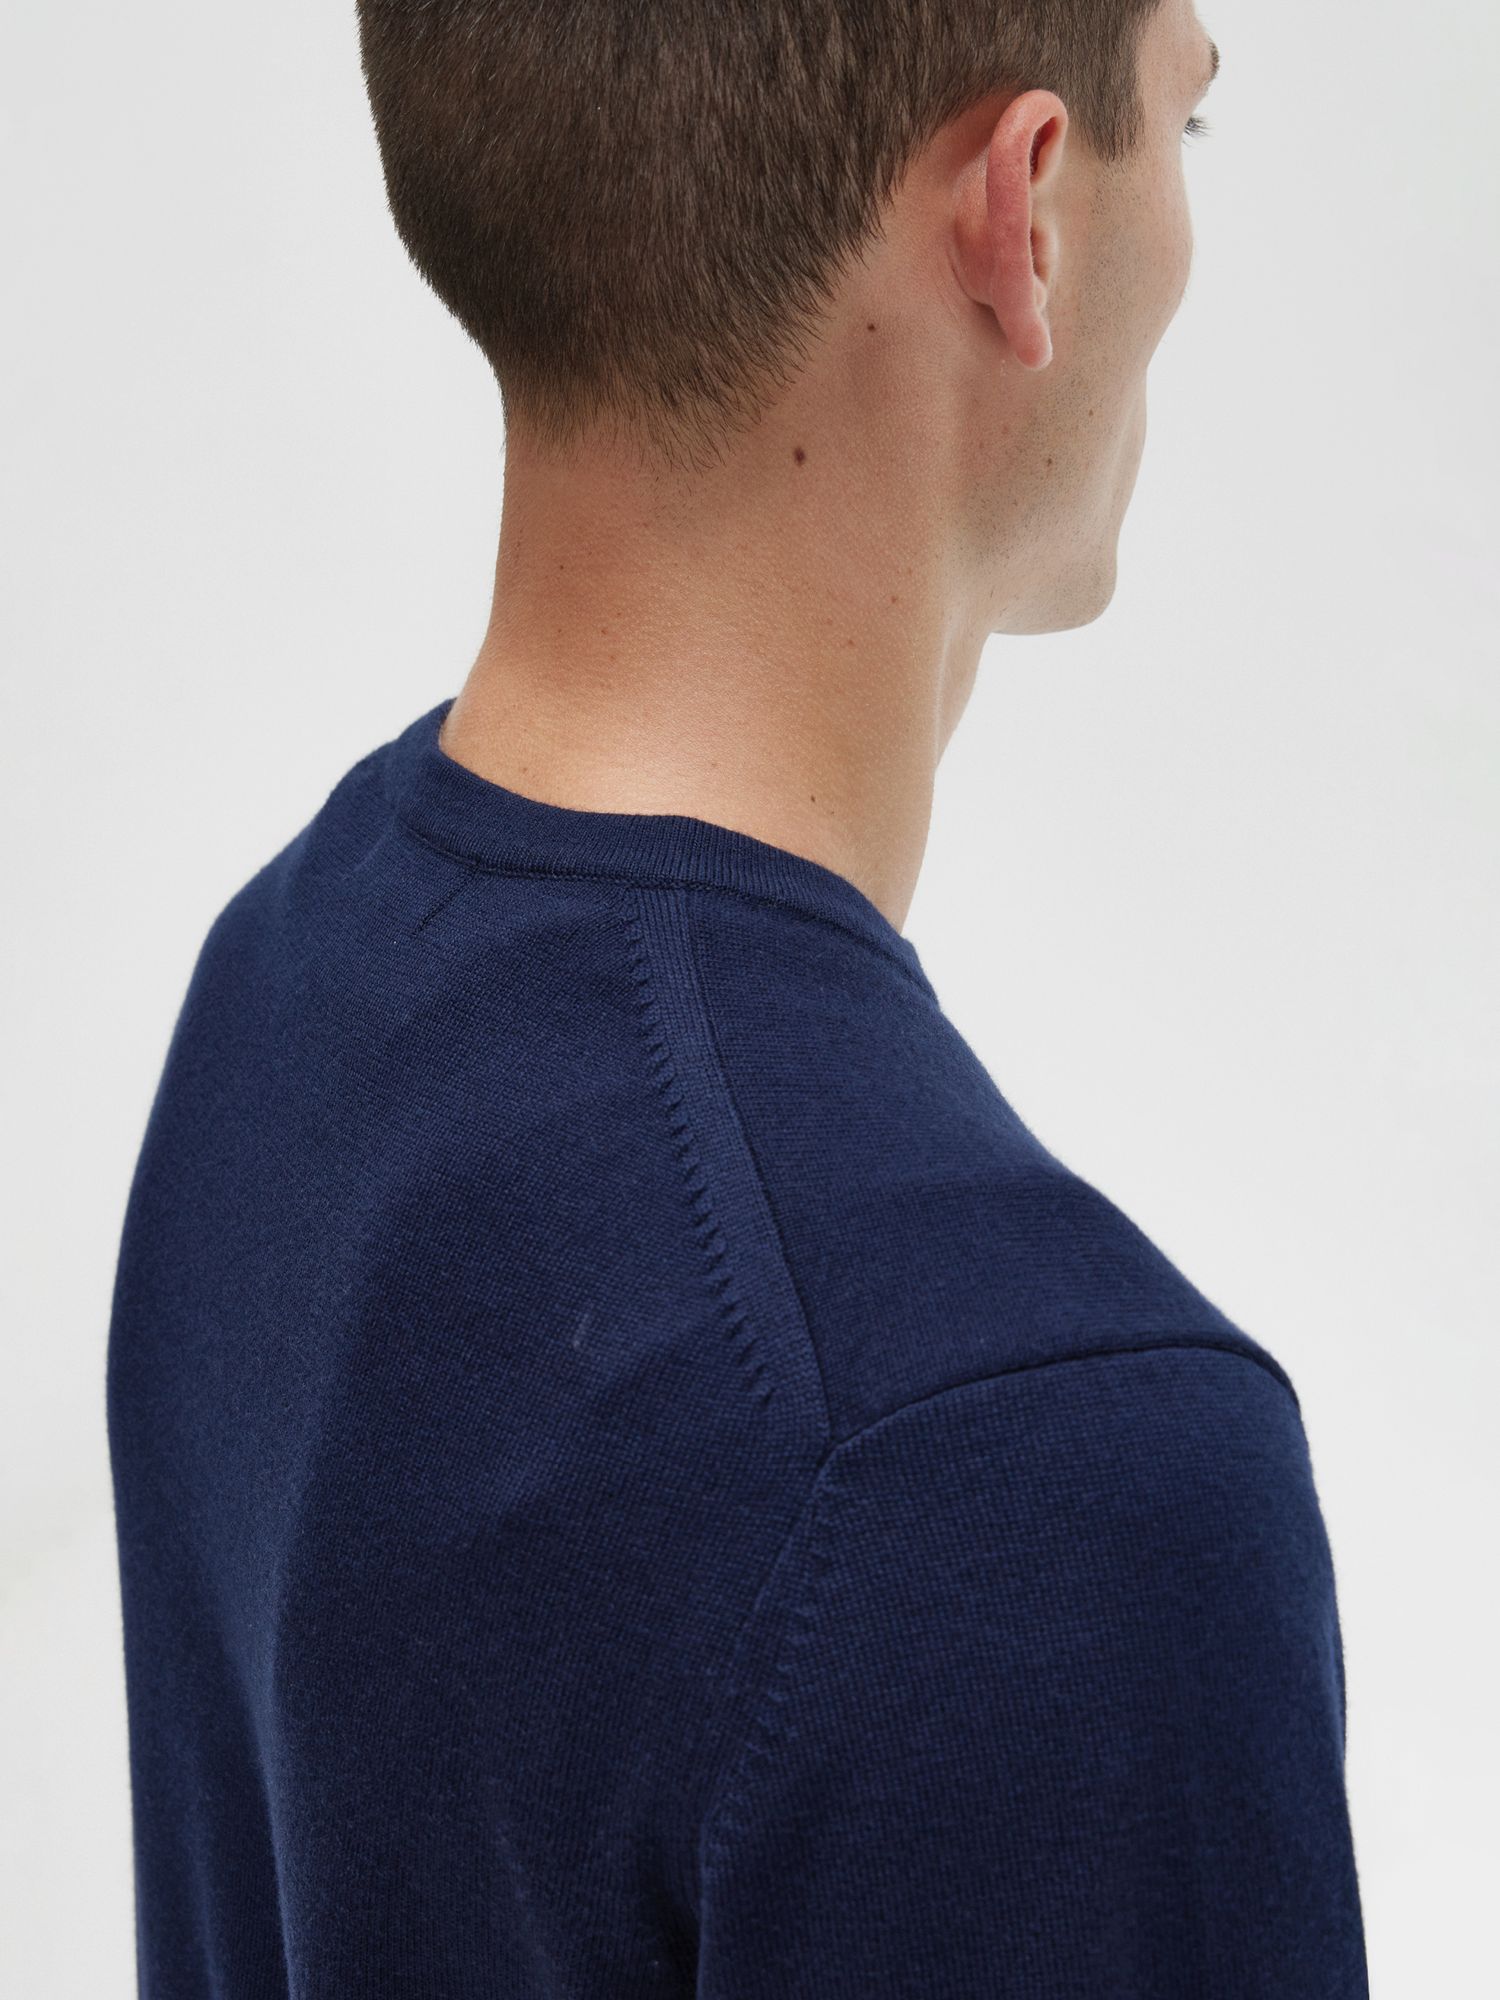 Fred Perry Classic Crew Neck Knit Jumper, Navy at John Lewis